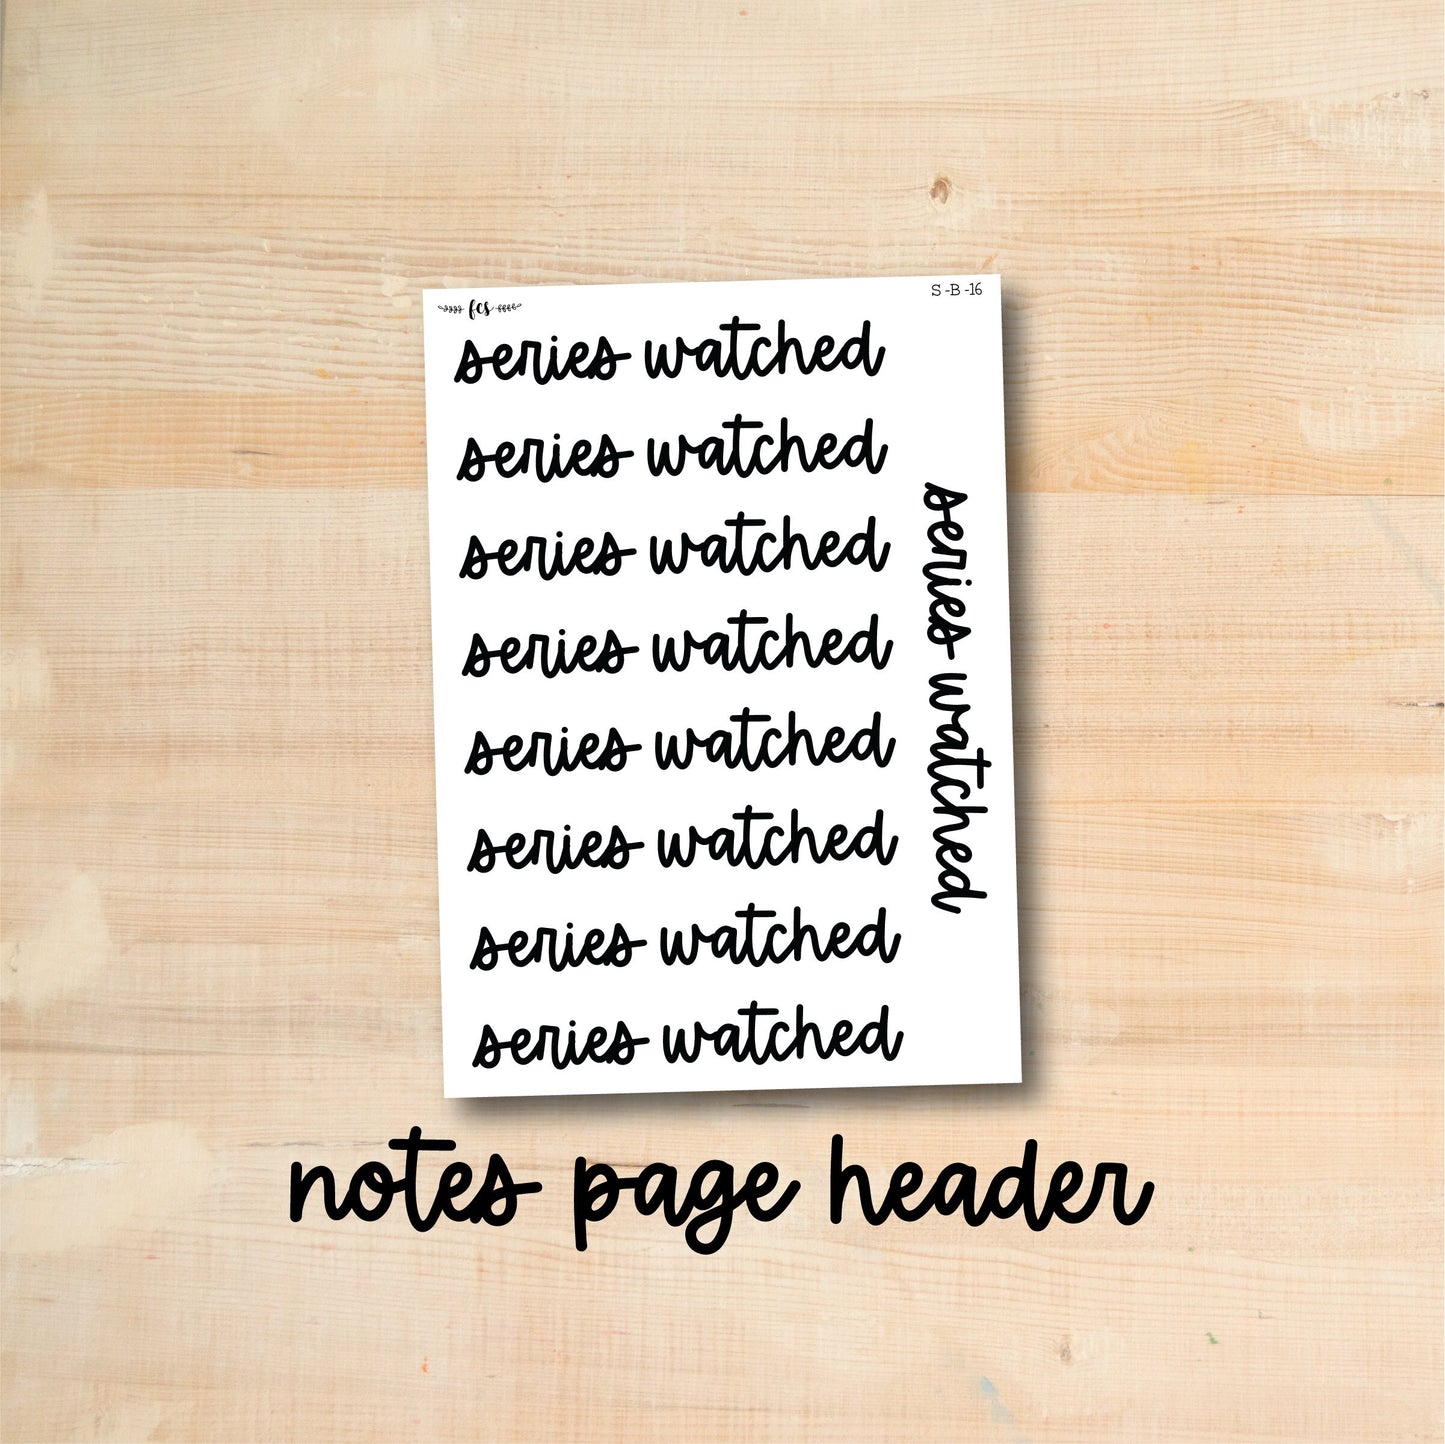 S-B-16 || SERIES WATCHED notes page header script stickers